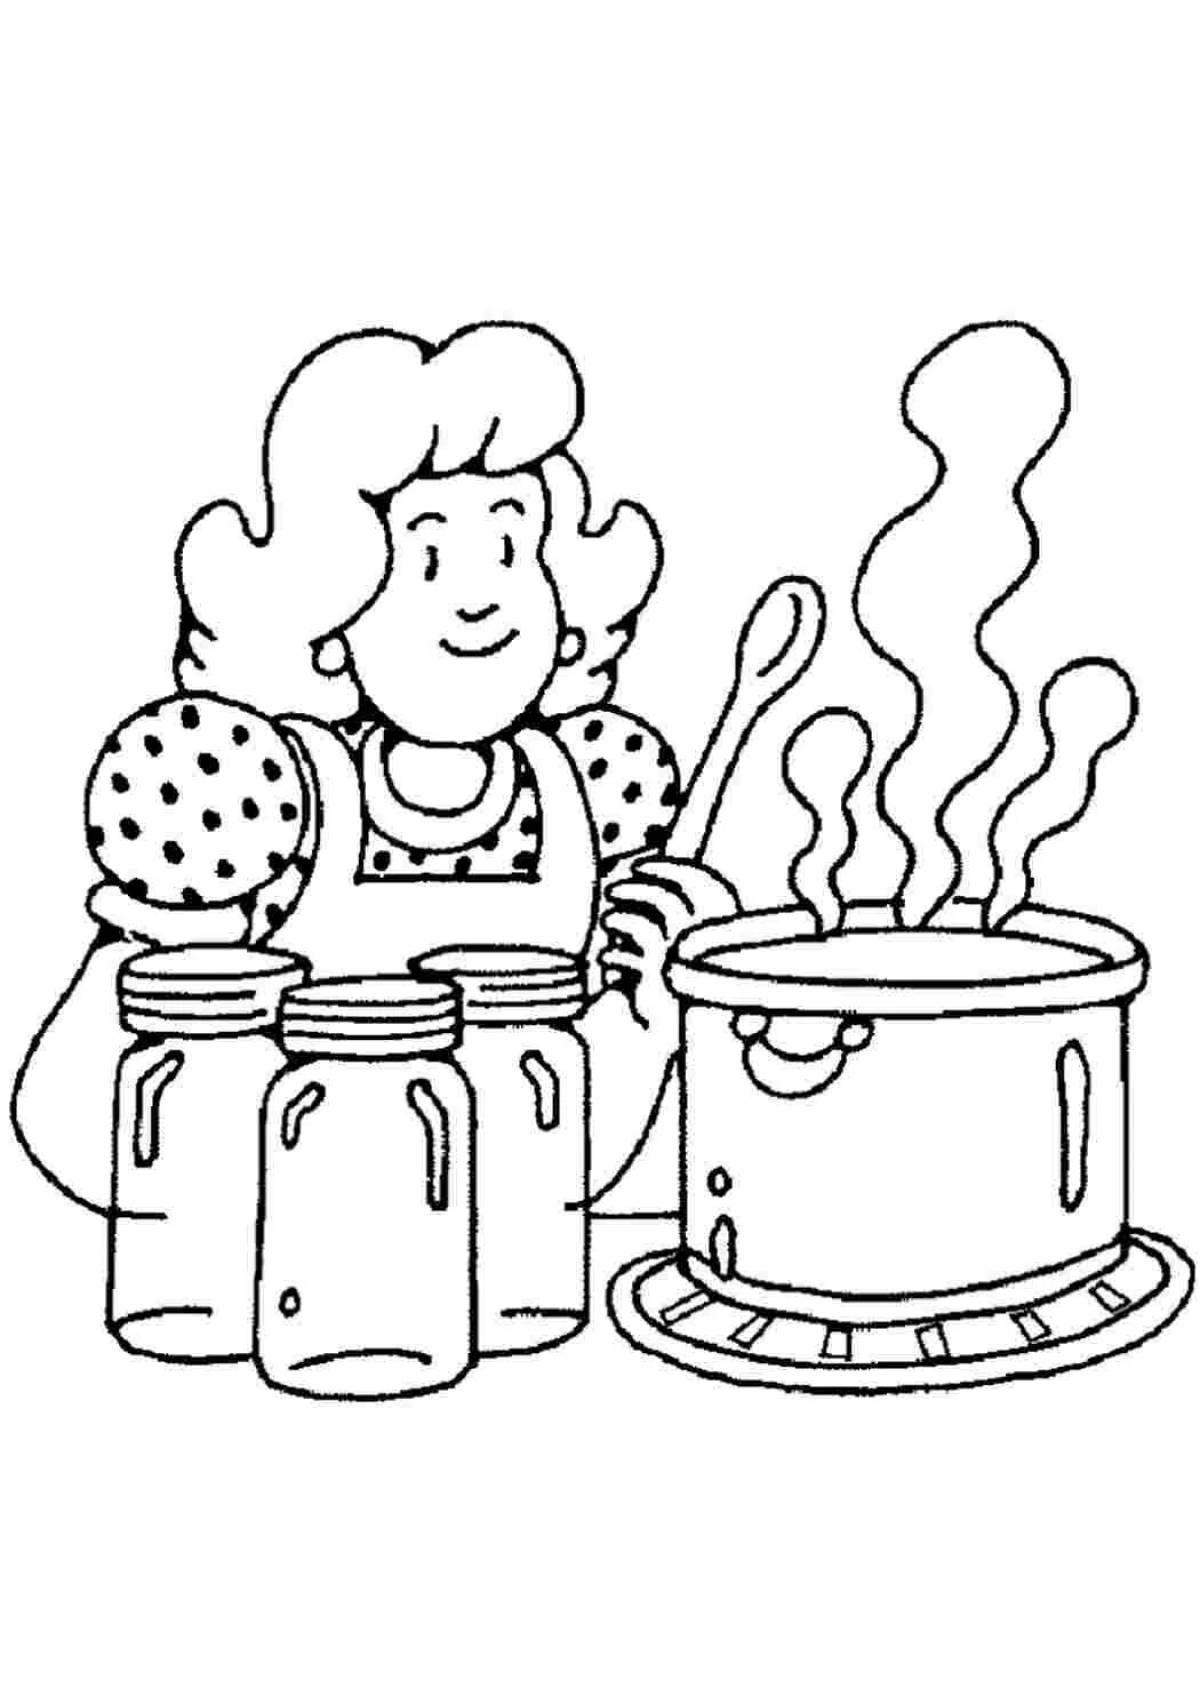 Splendid fire friend fire enemy coloring pages for kids